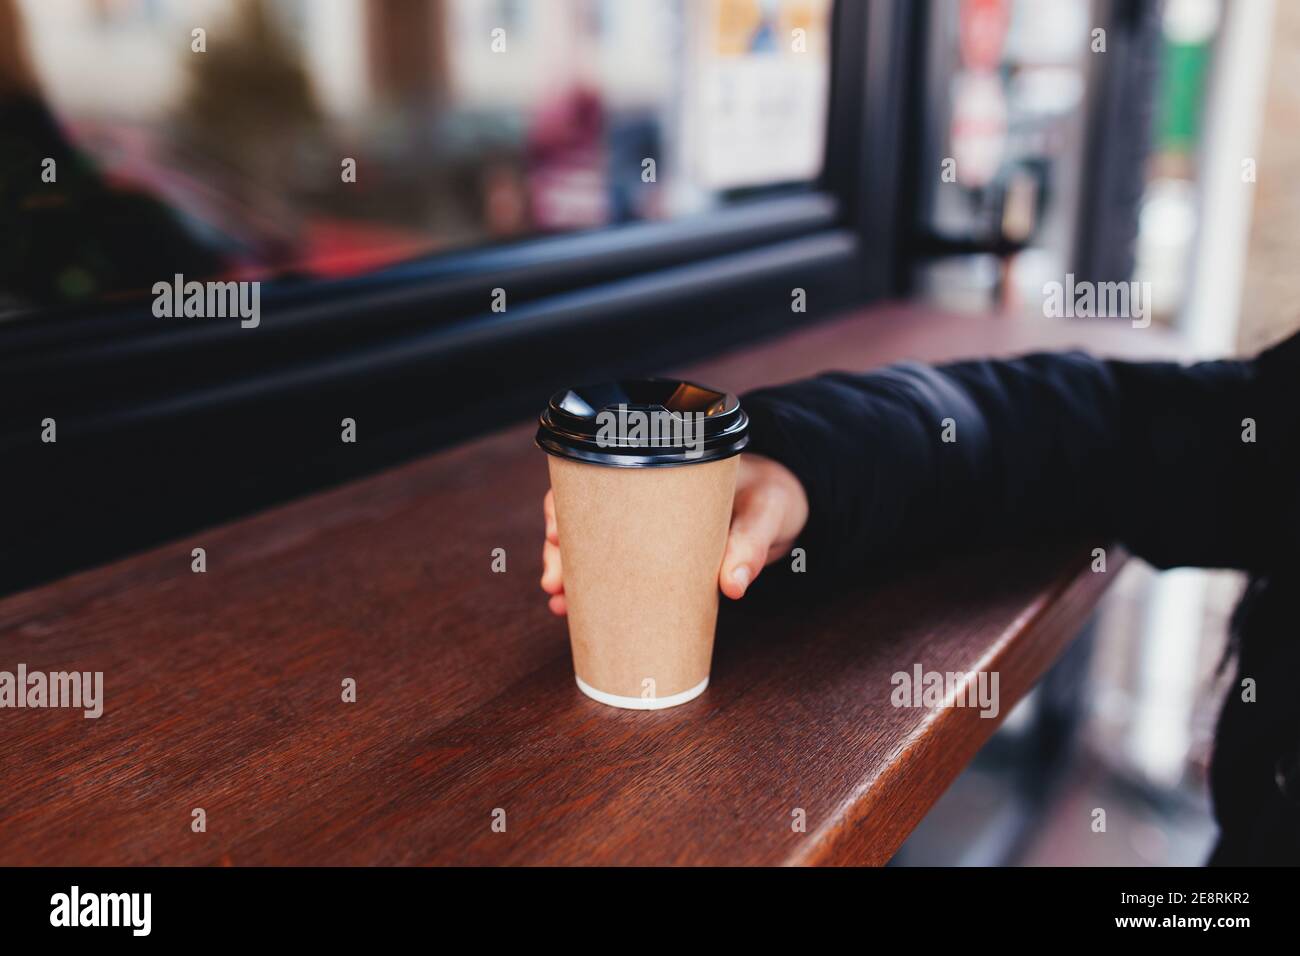 Girl holds a paper cup of coffee in hand near cafe Stock Photo